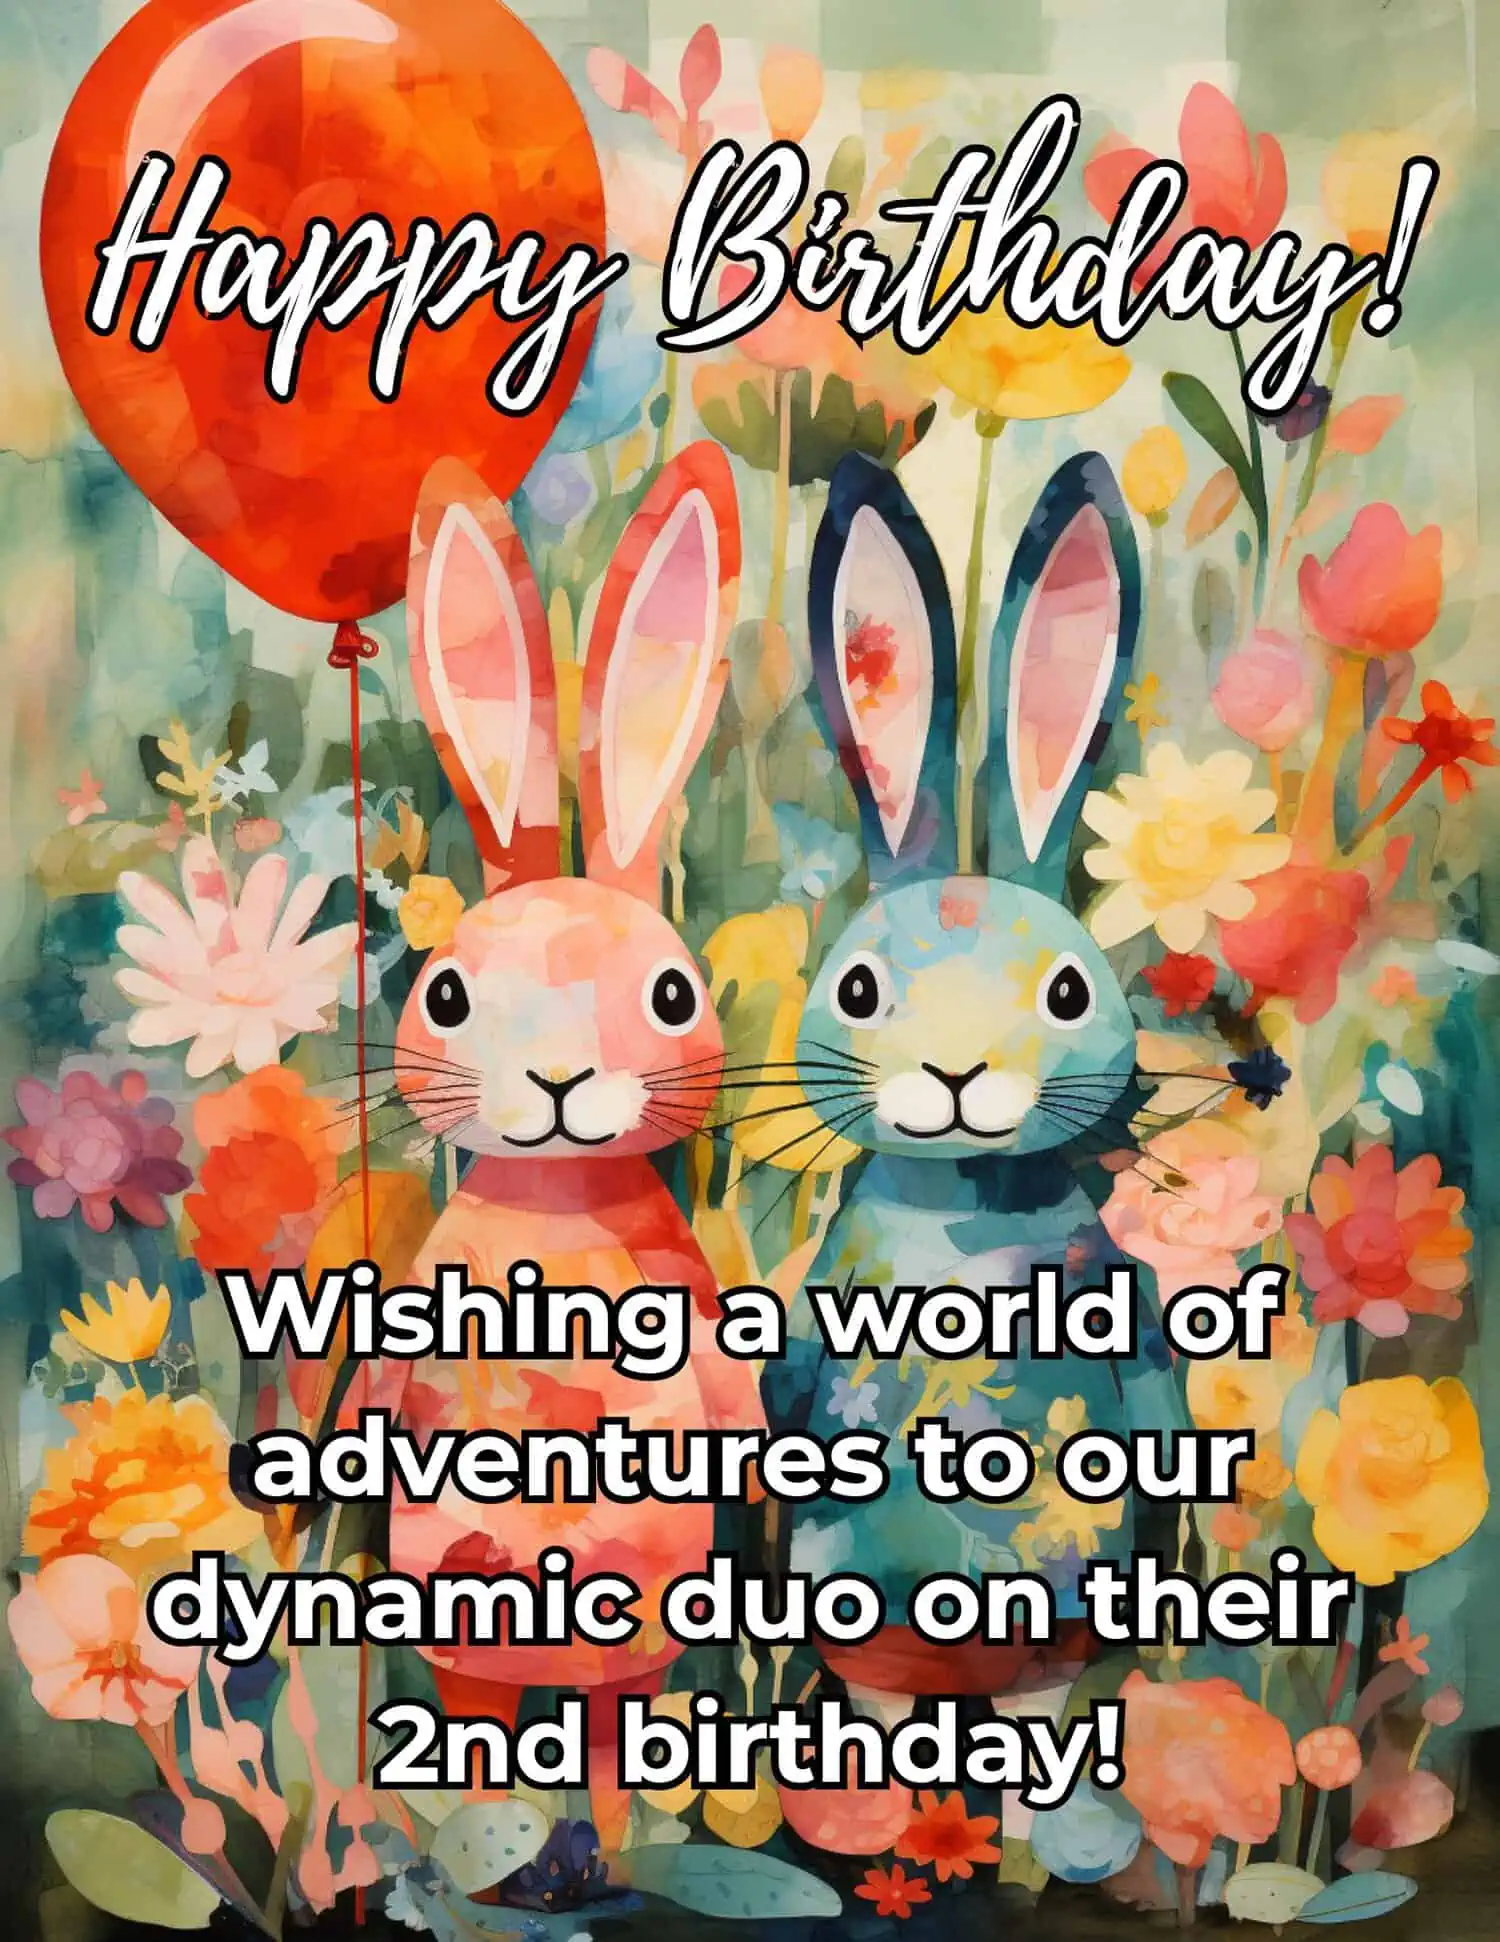 Unique and delightful birthday wishes for twins on their exciting second birthday.